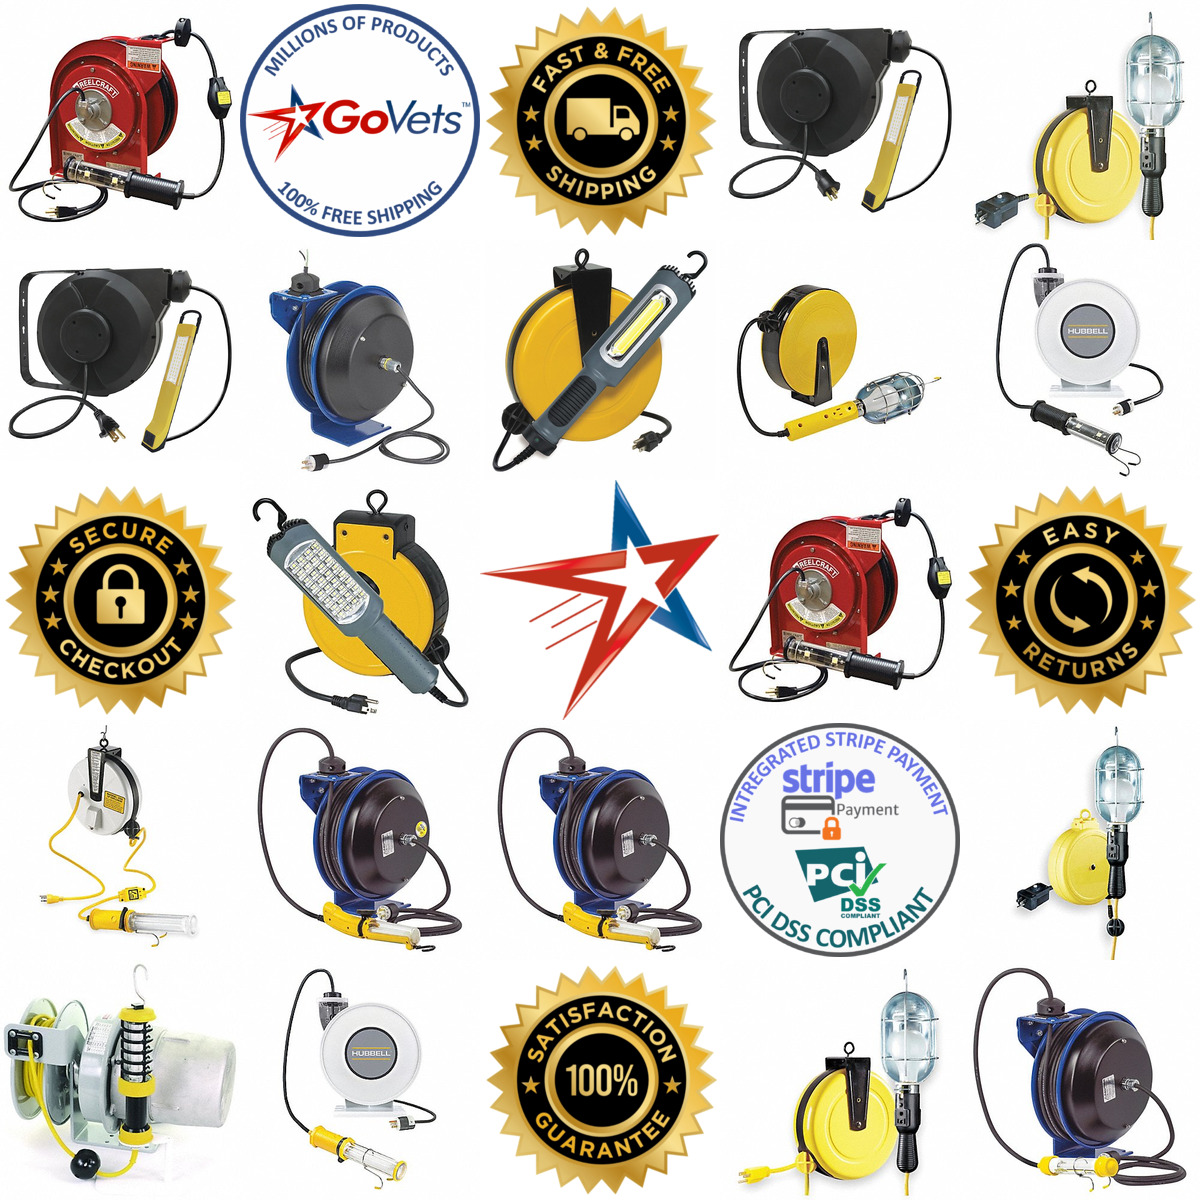 A selection of Cord Reels With Hand Lamps products on GoVets